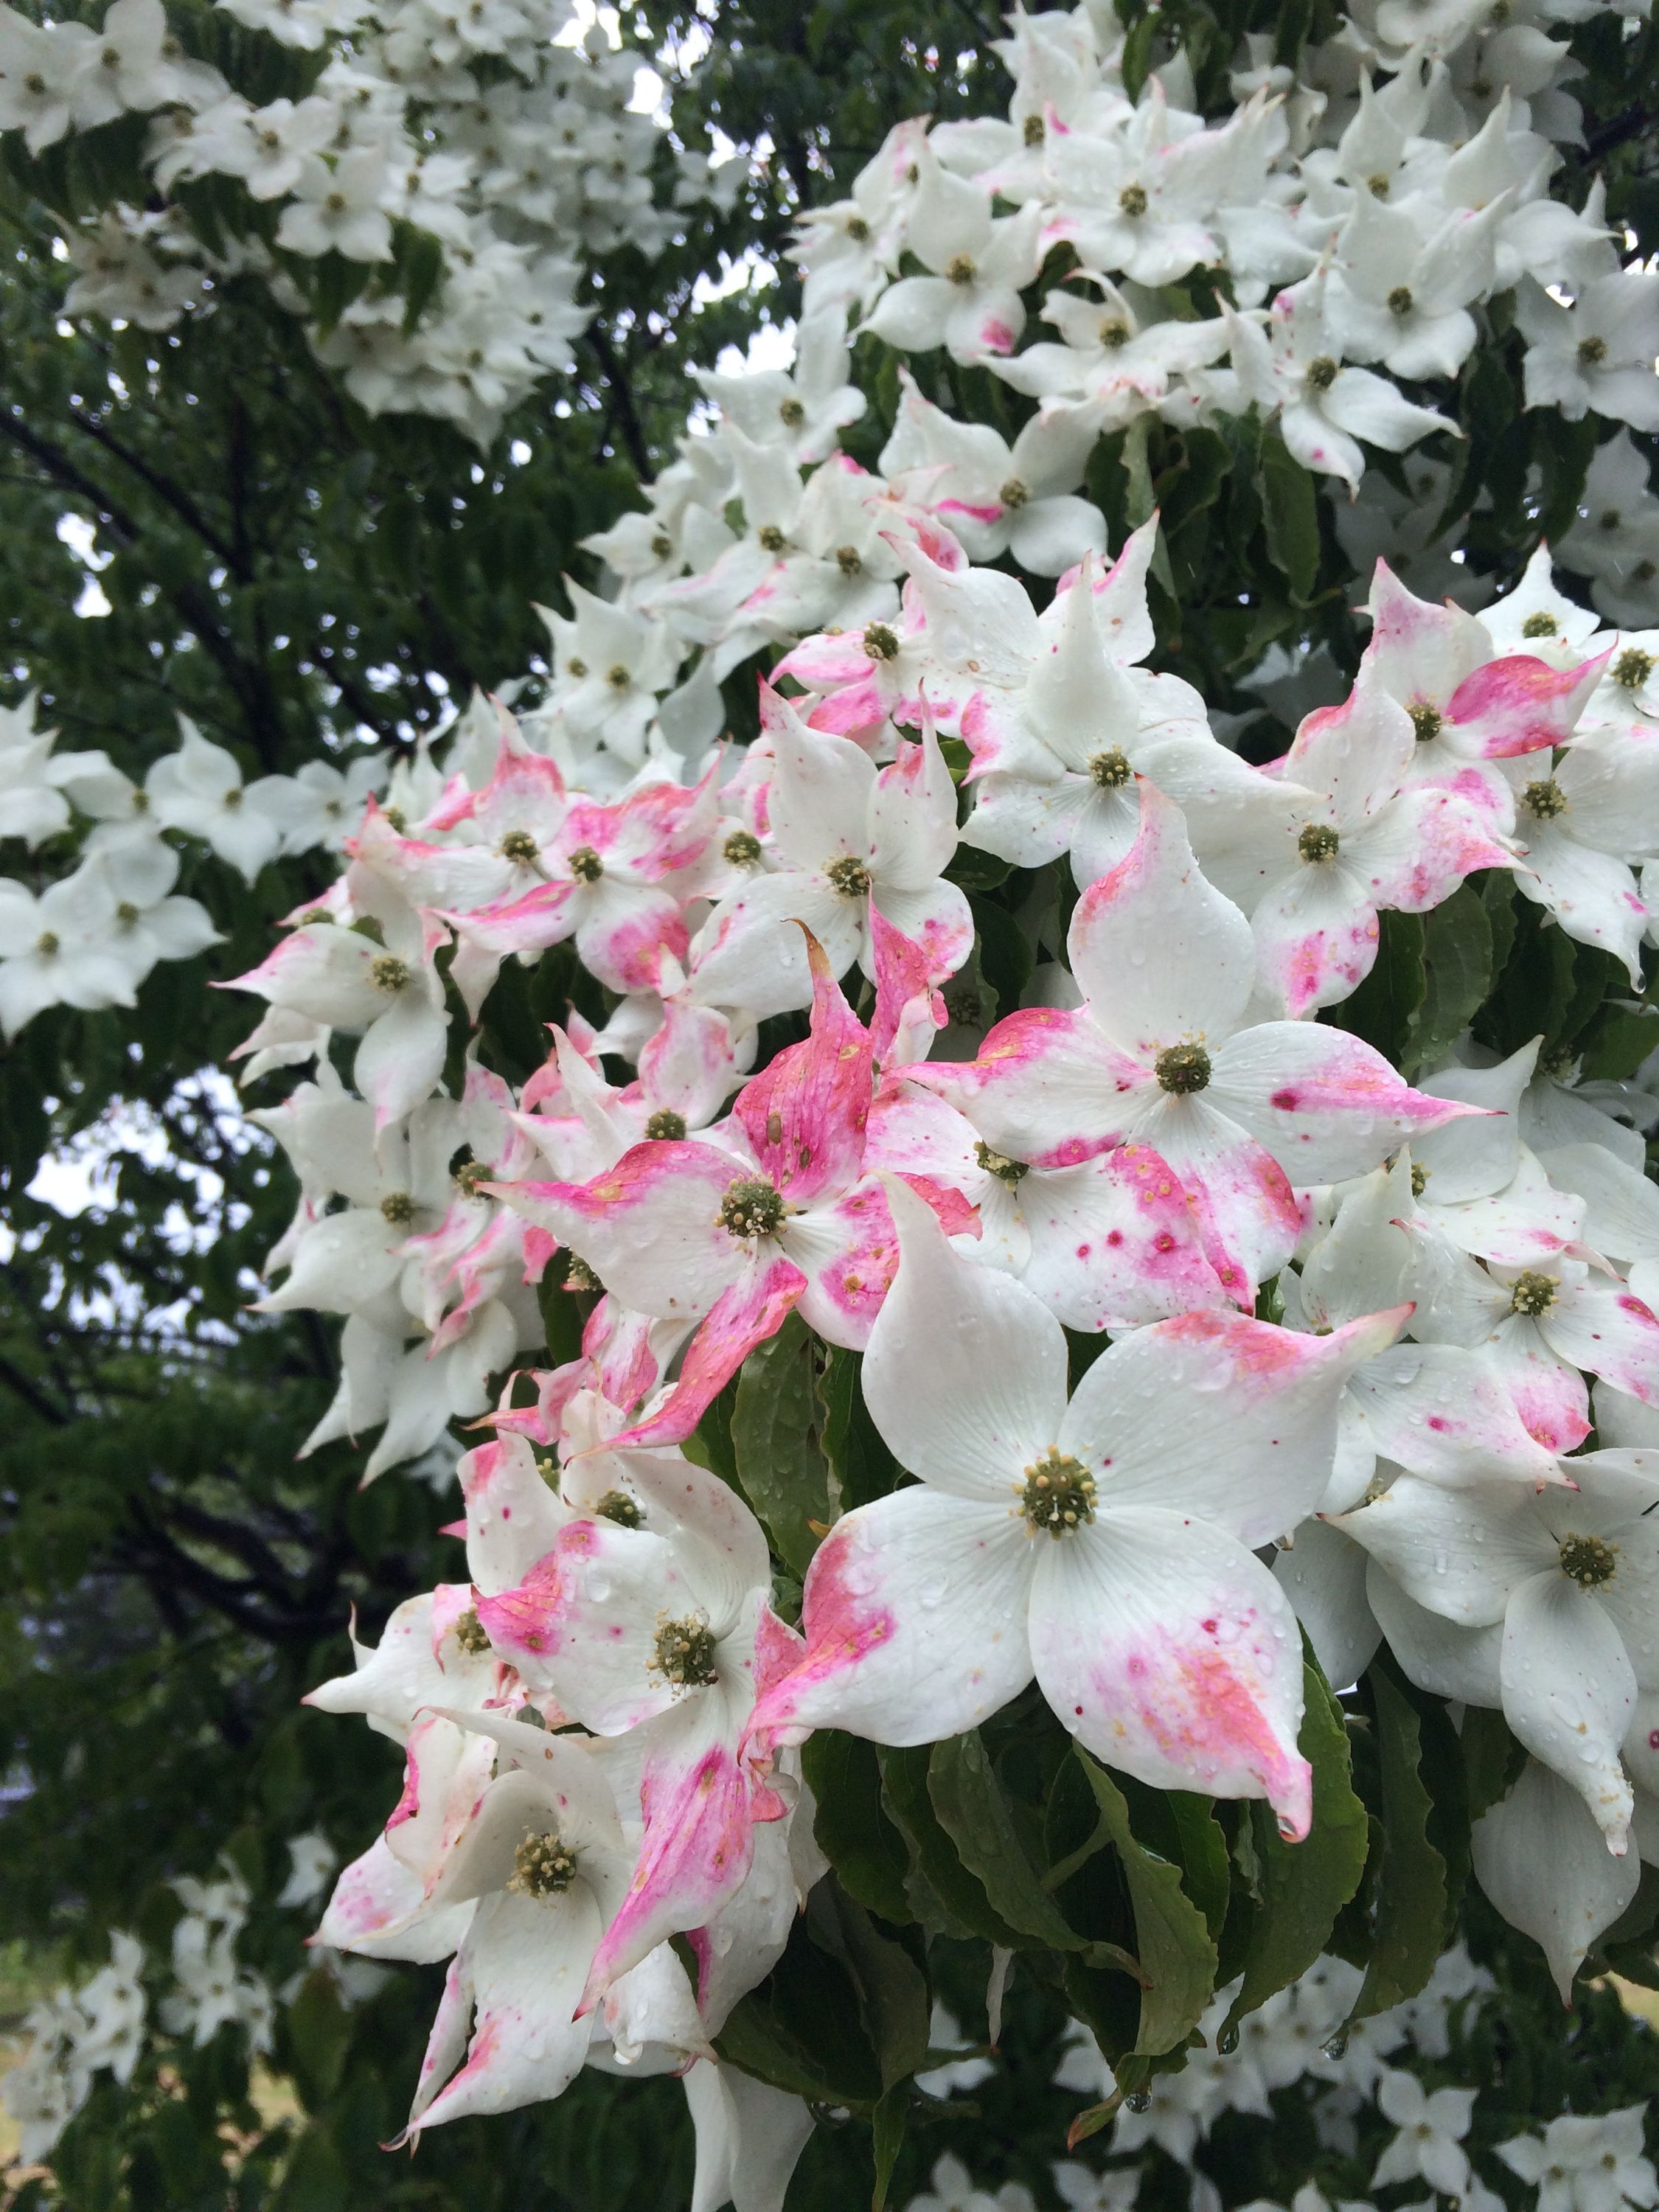 White and pink variegating flowers in the rain.